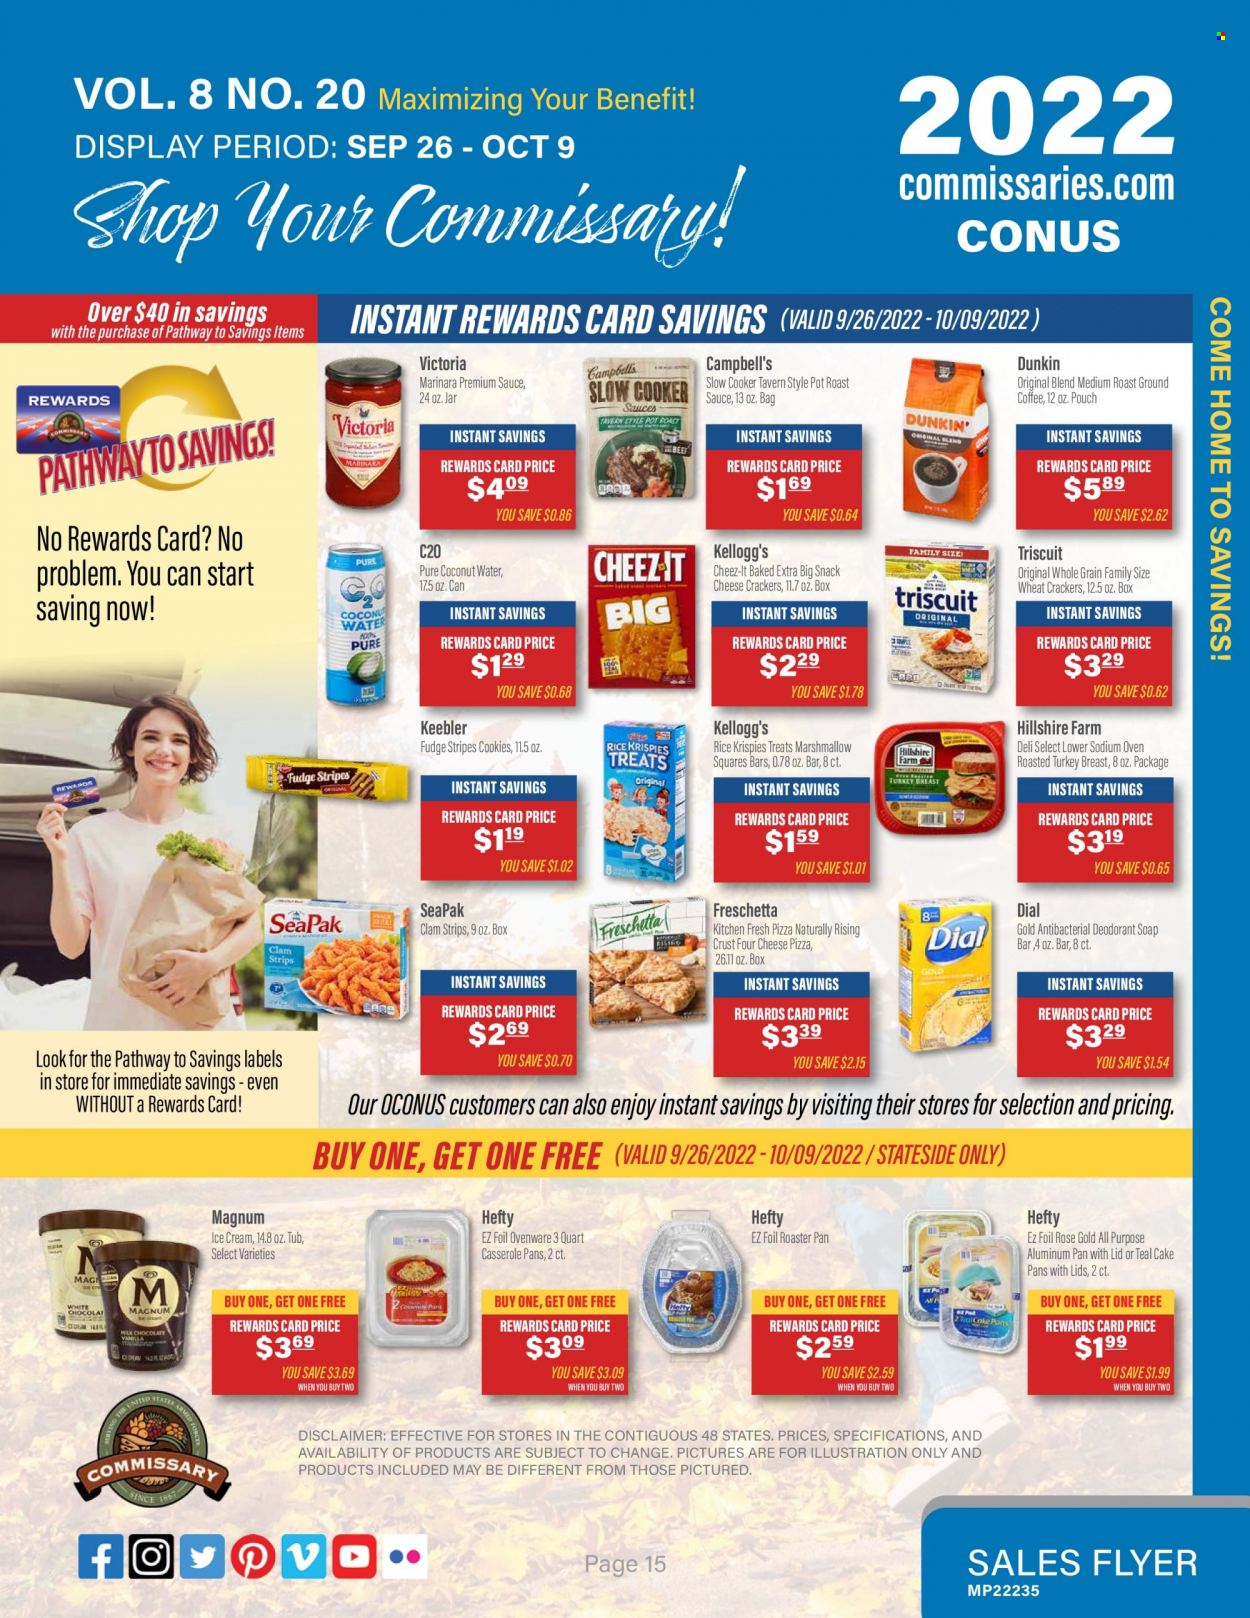 thumbnail - Commissary Flyer - 09/26/2022 - 10/09/2022 - Sales products - clams, Campbell's, pizza, casserole, sauce, ready meal, Hillshire Farm, Magnum, ice cream, strips, marshmallows, crackers, Kellogg's, Keebler, salty snack, crispy rice bar, coconut water, ground coffee, pot roast, soap bar, Dial, soap, deodorant, Hefty. Page 15.